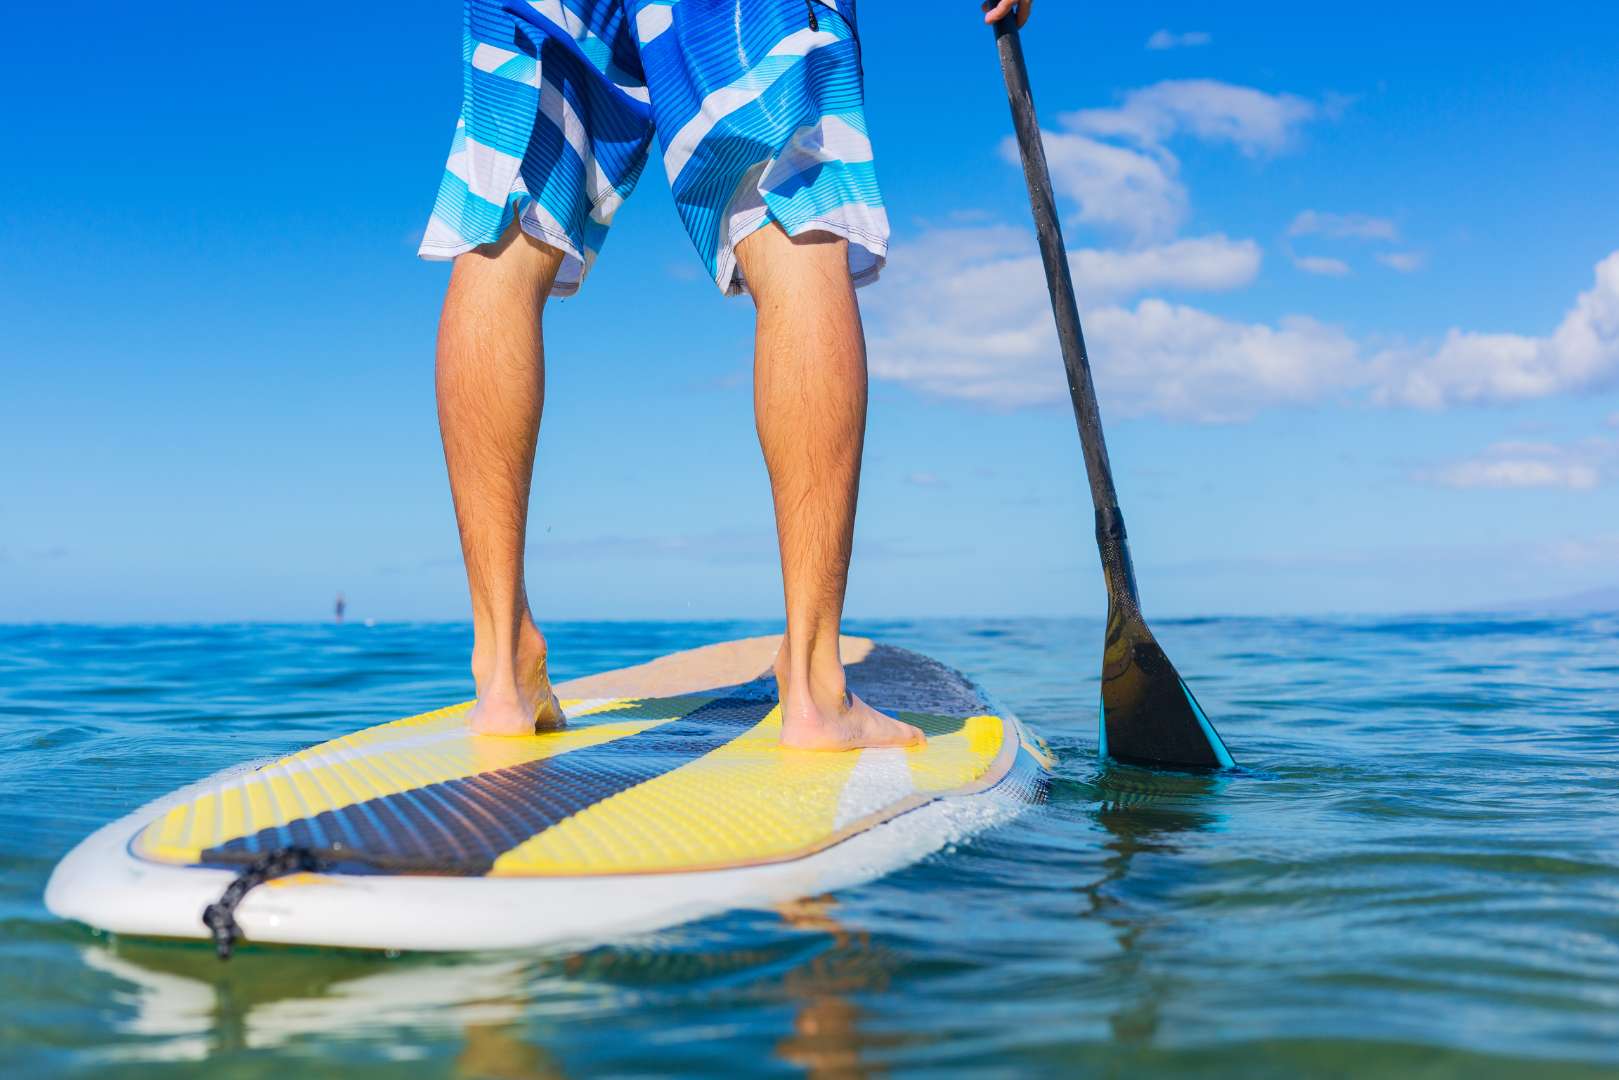 a person on a surfboard in the water